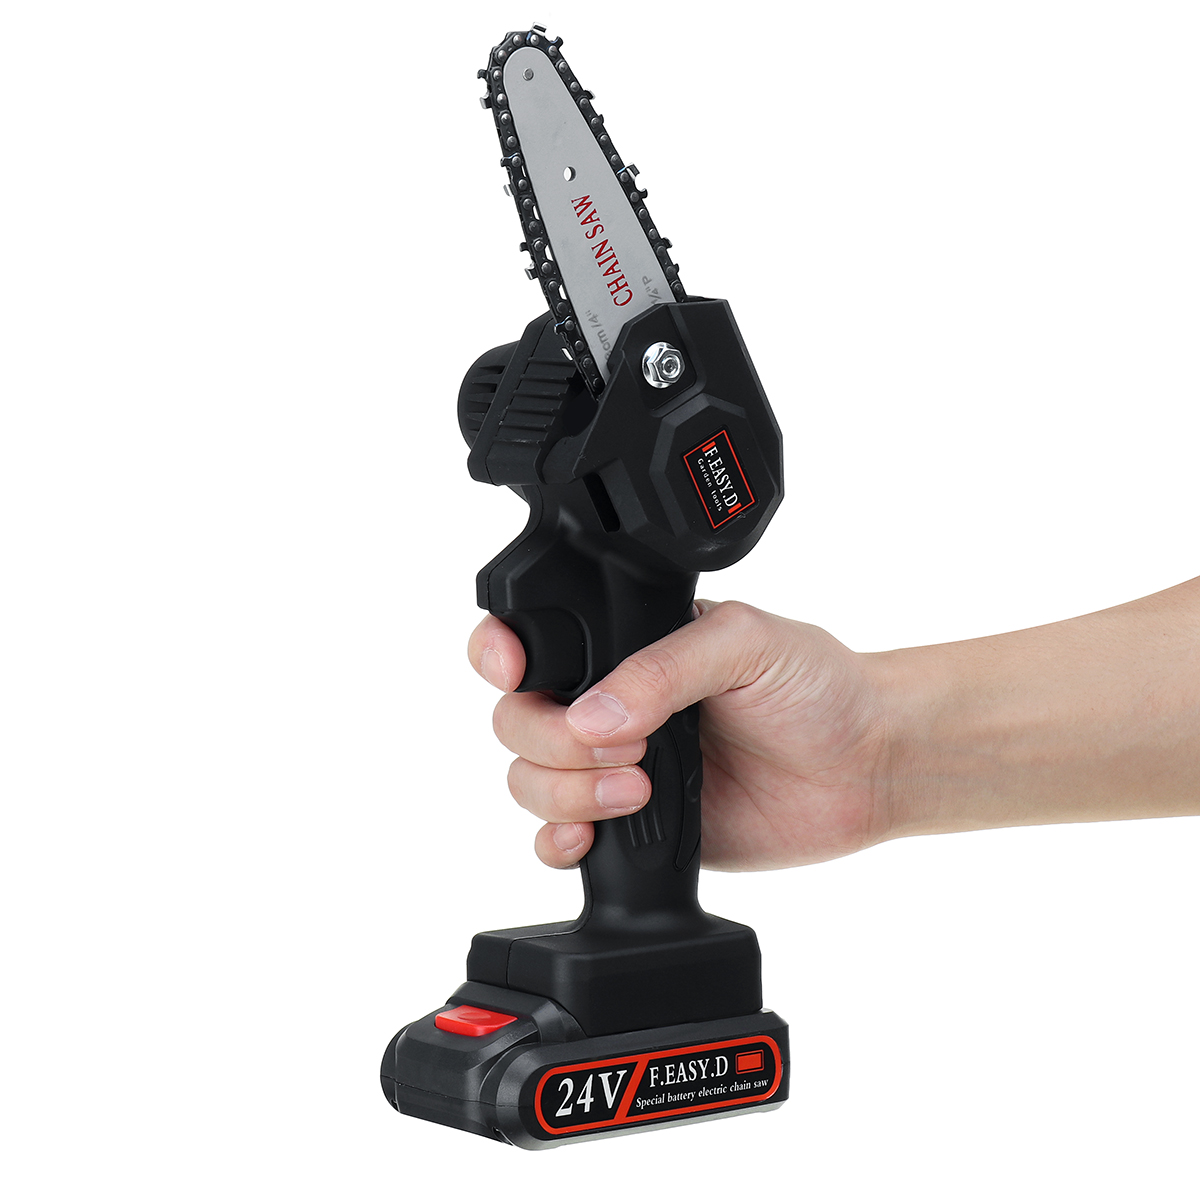 24V-Rechargeable-Cordless-Electric-Saw-Portable-Woodworking-Cutting-Tool-W-Battery-1788980-6